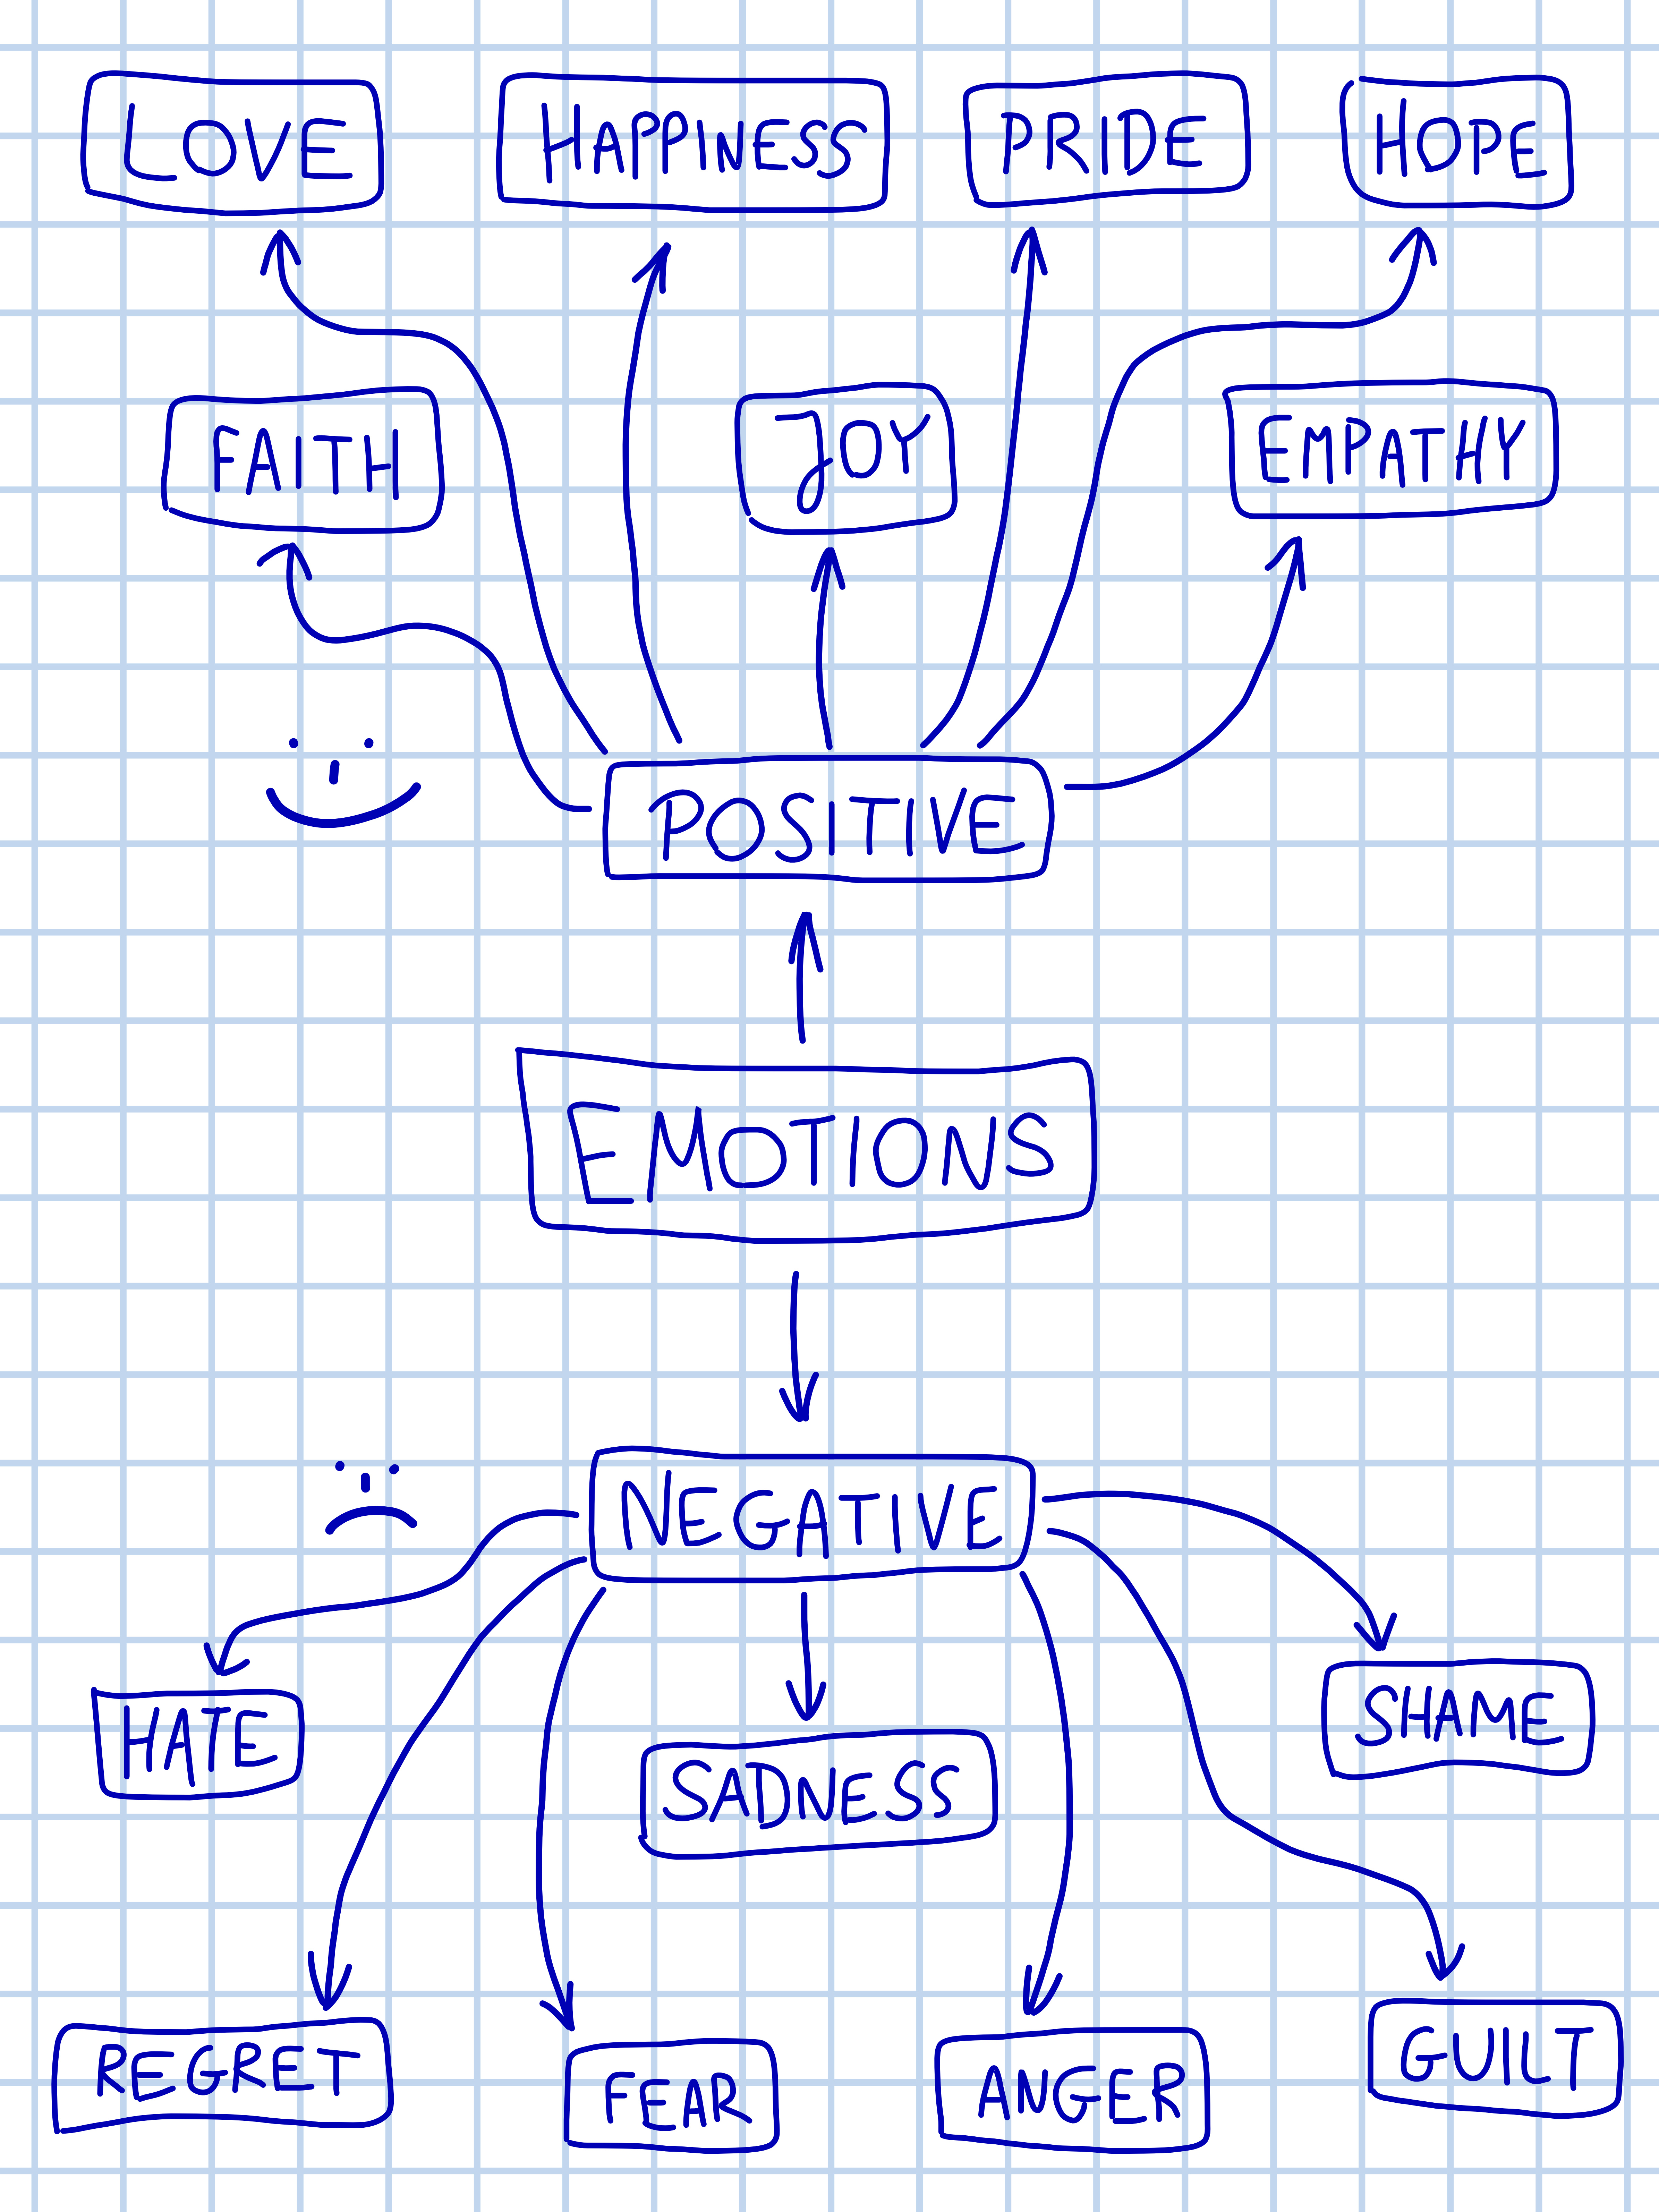 Negative emotions are bad; we just need to recognize the information they give us